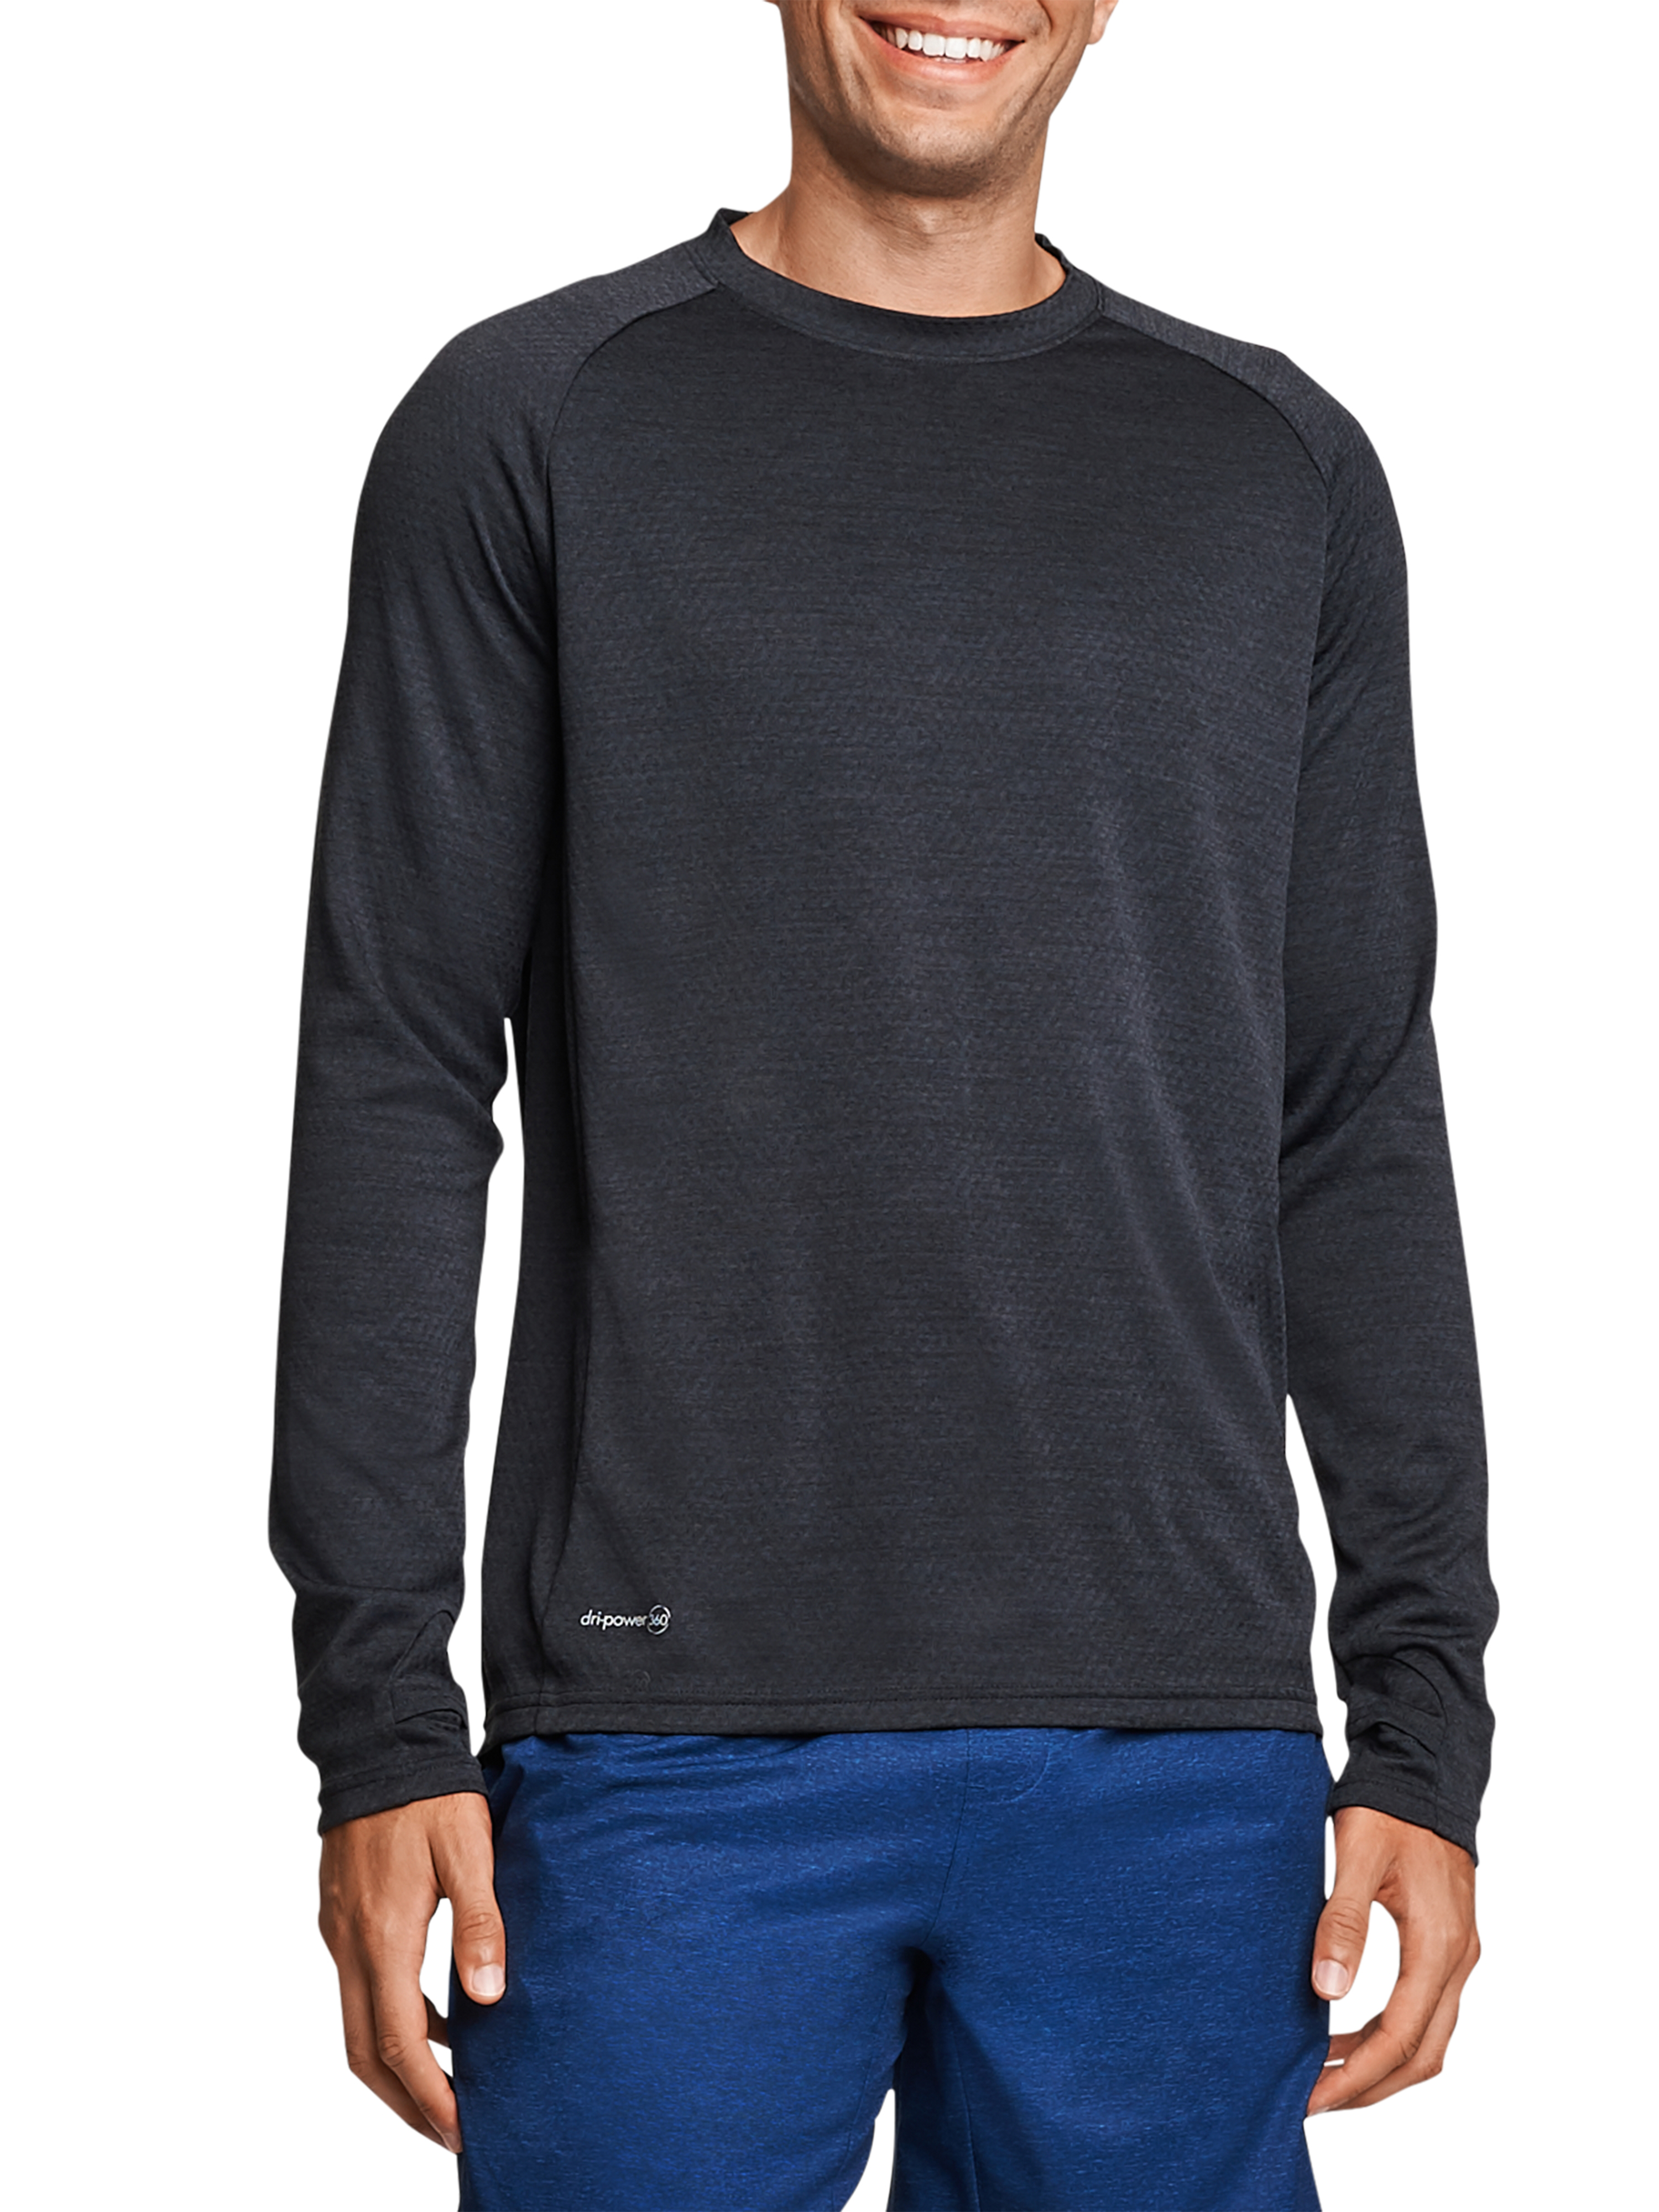 Russell Men's and Big Men's Long Sleeve Performance Tee, up to Size 5XL - image 1 of 7